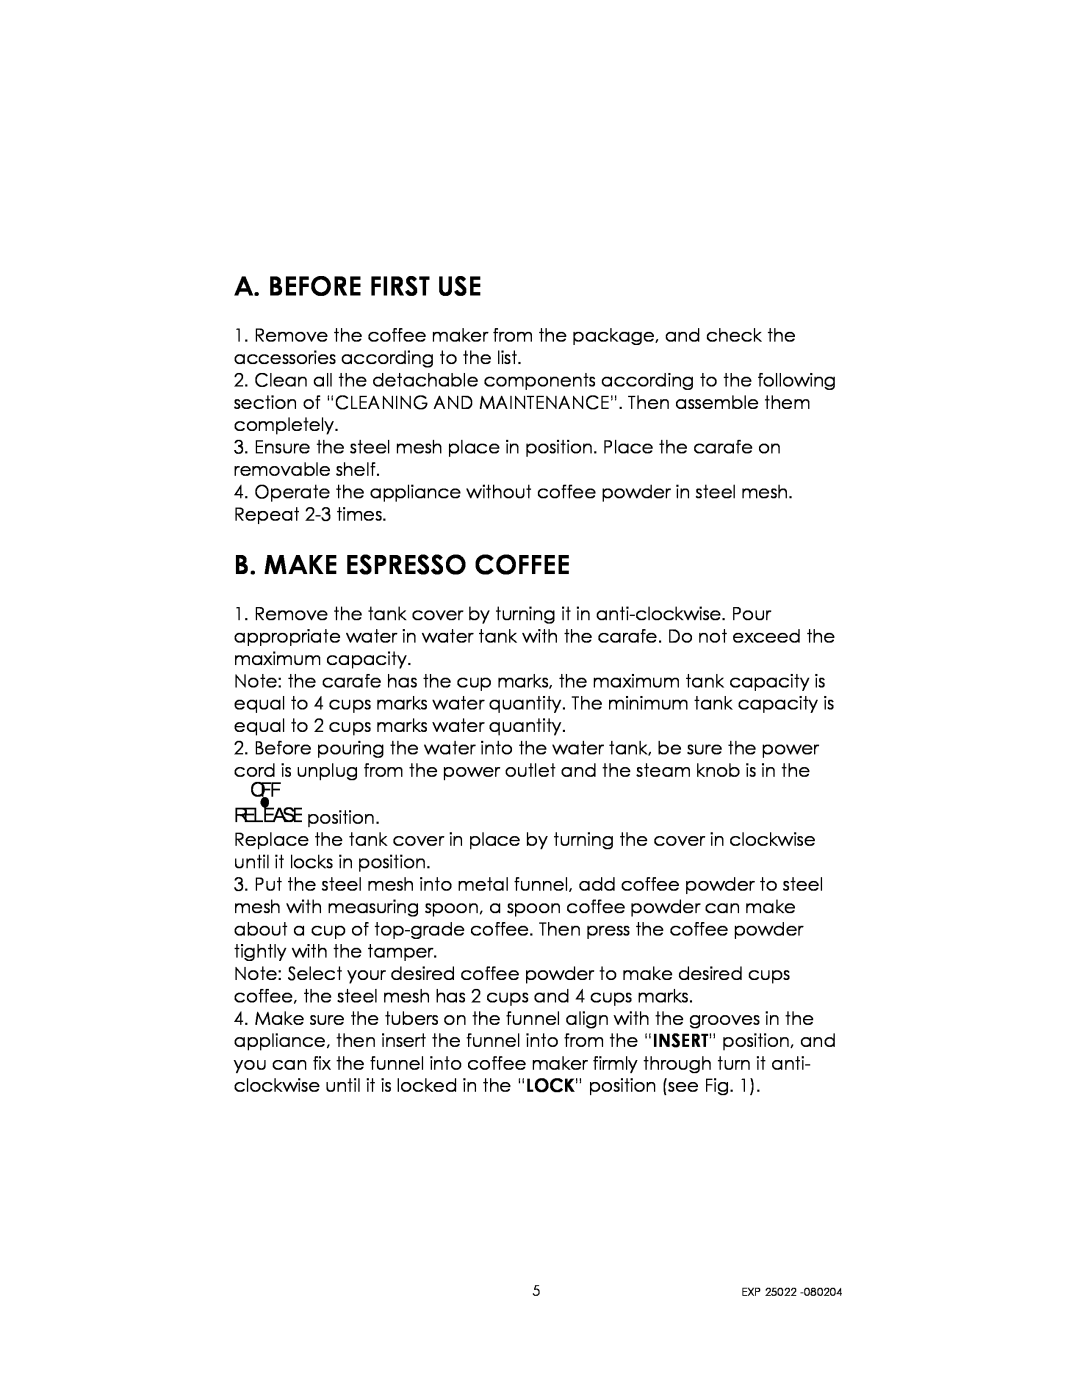 Kalorik EXP 25022 manual A. Before First Use, B. Make Espresso Coffee, OFF RELEASE position 